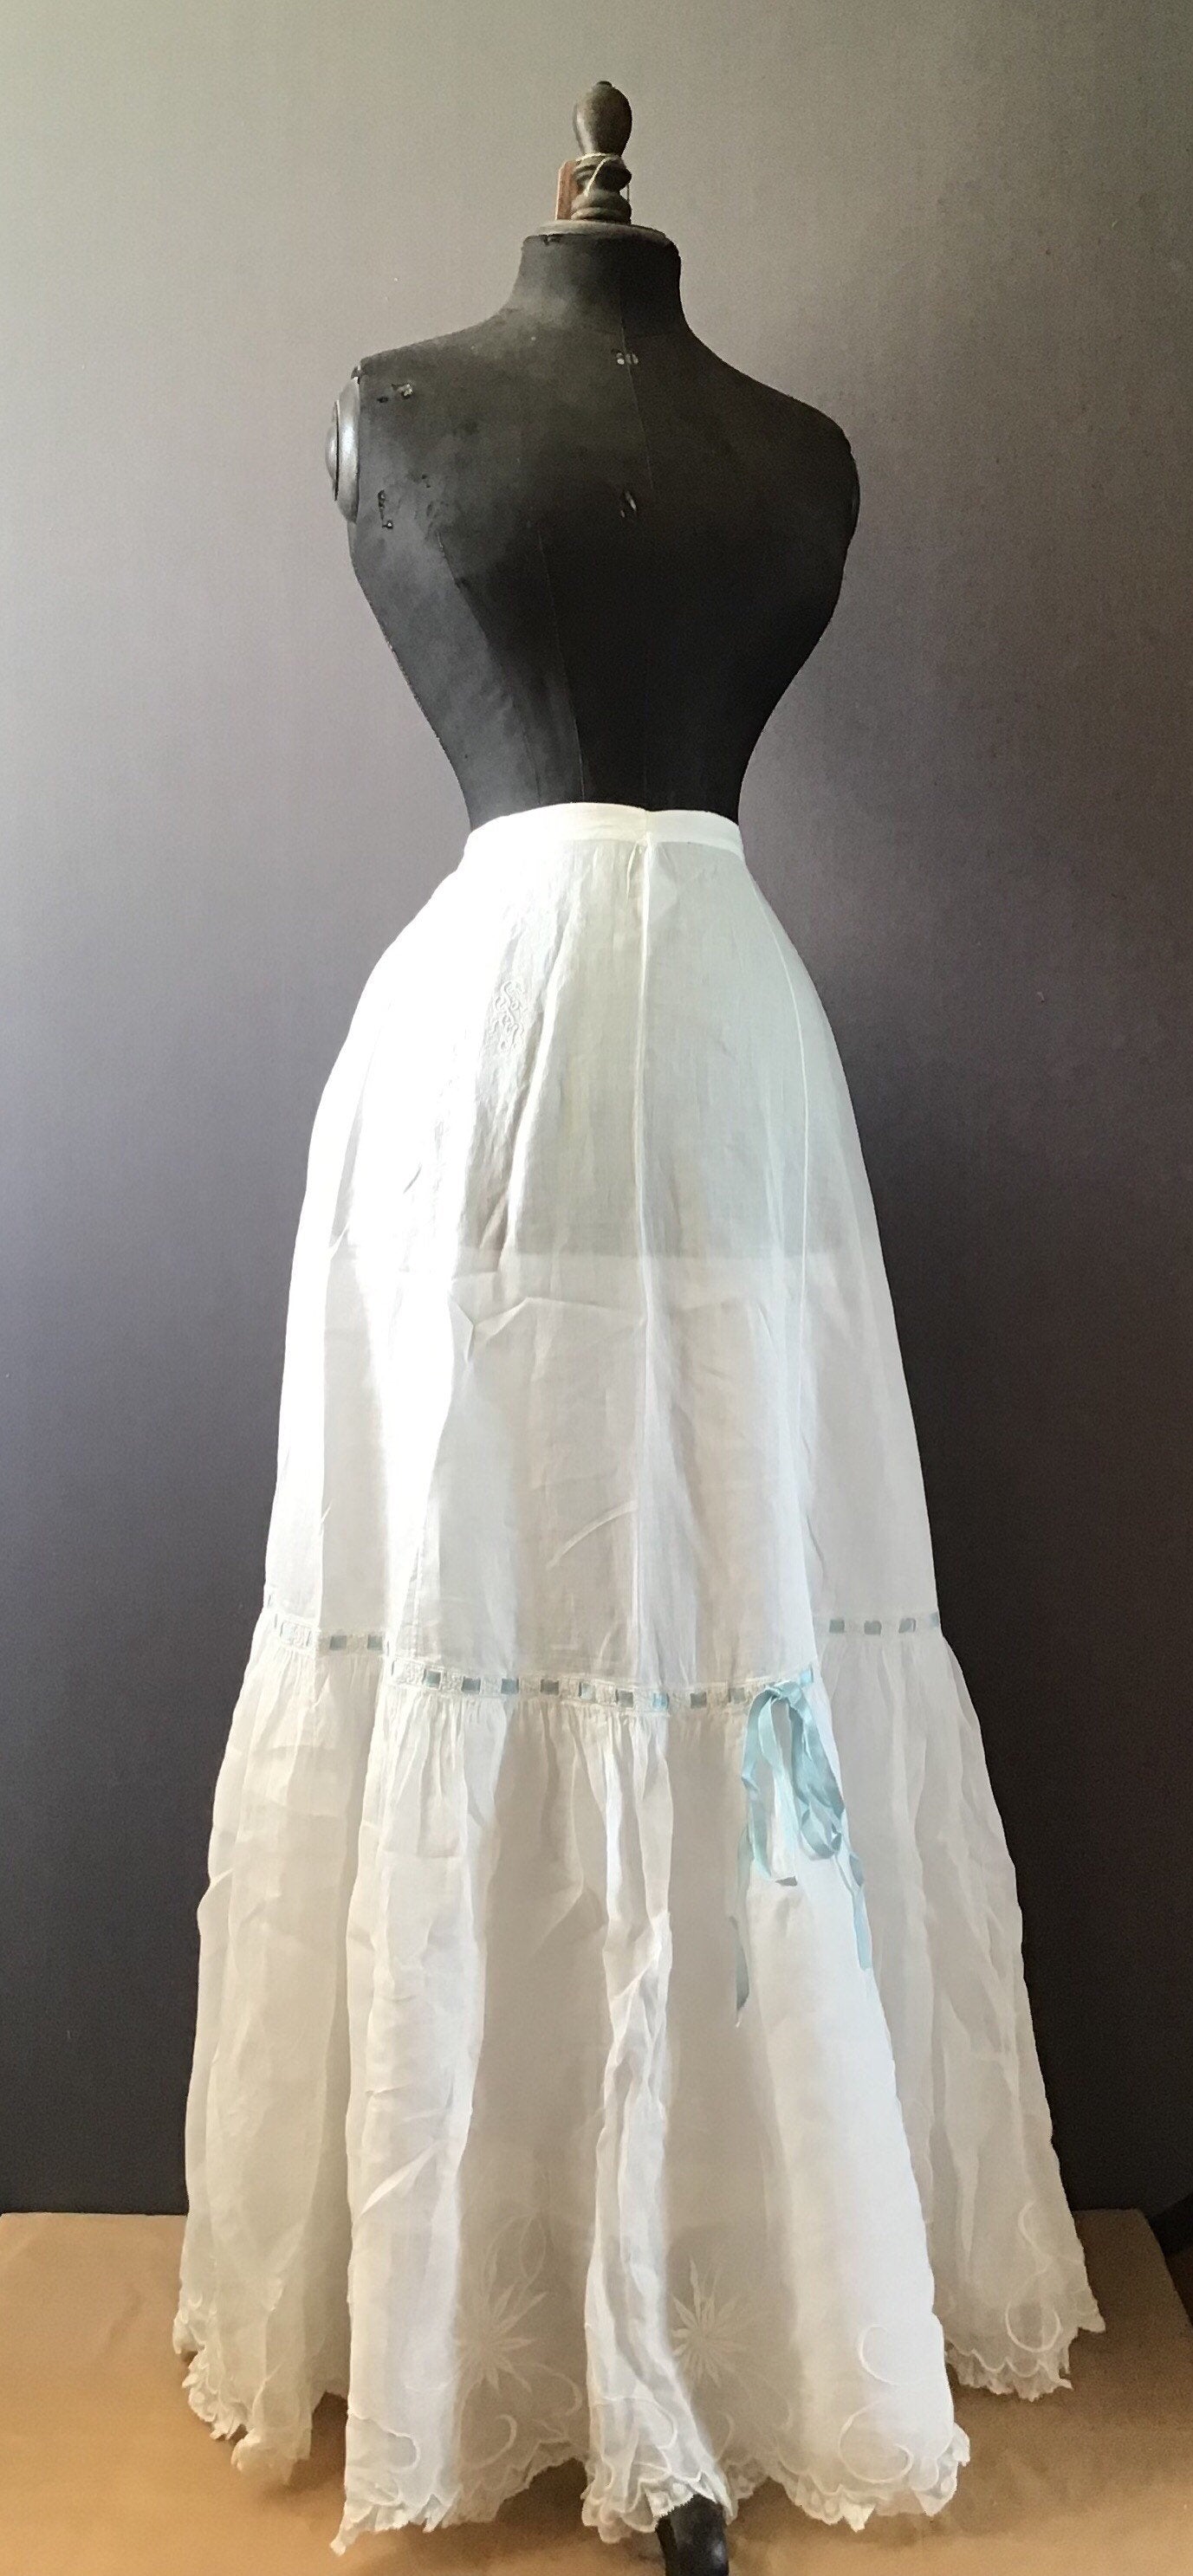 Petticoat, White Cotton with Deep Lace Frill; Unknown maker; 1900